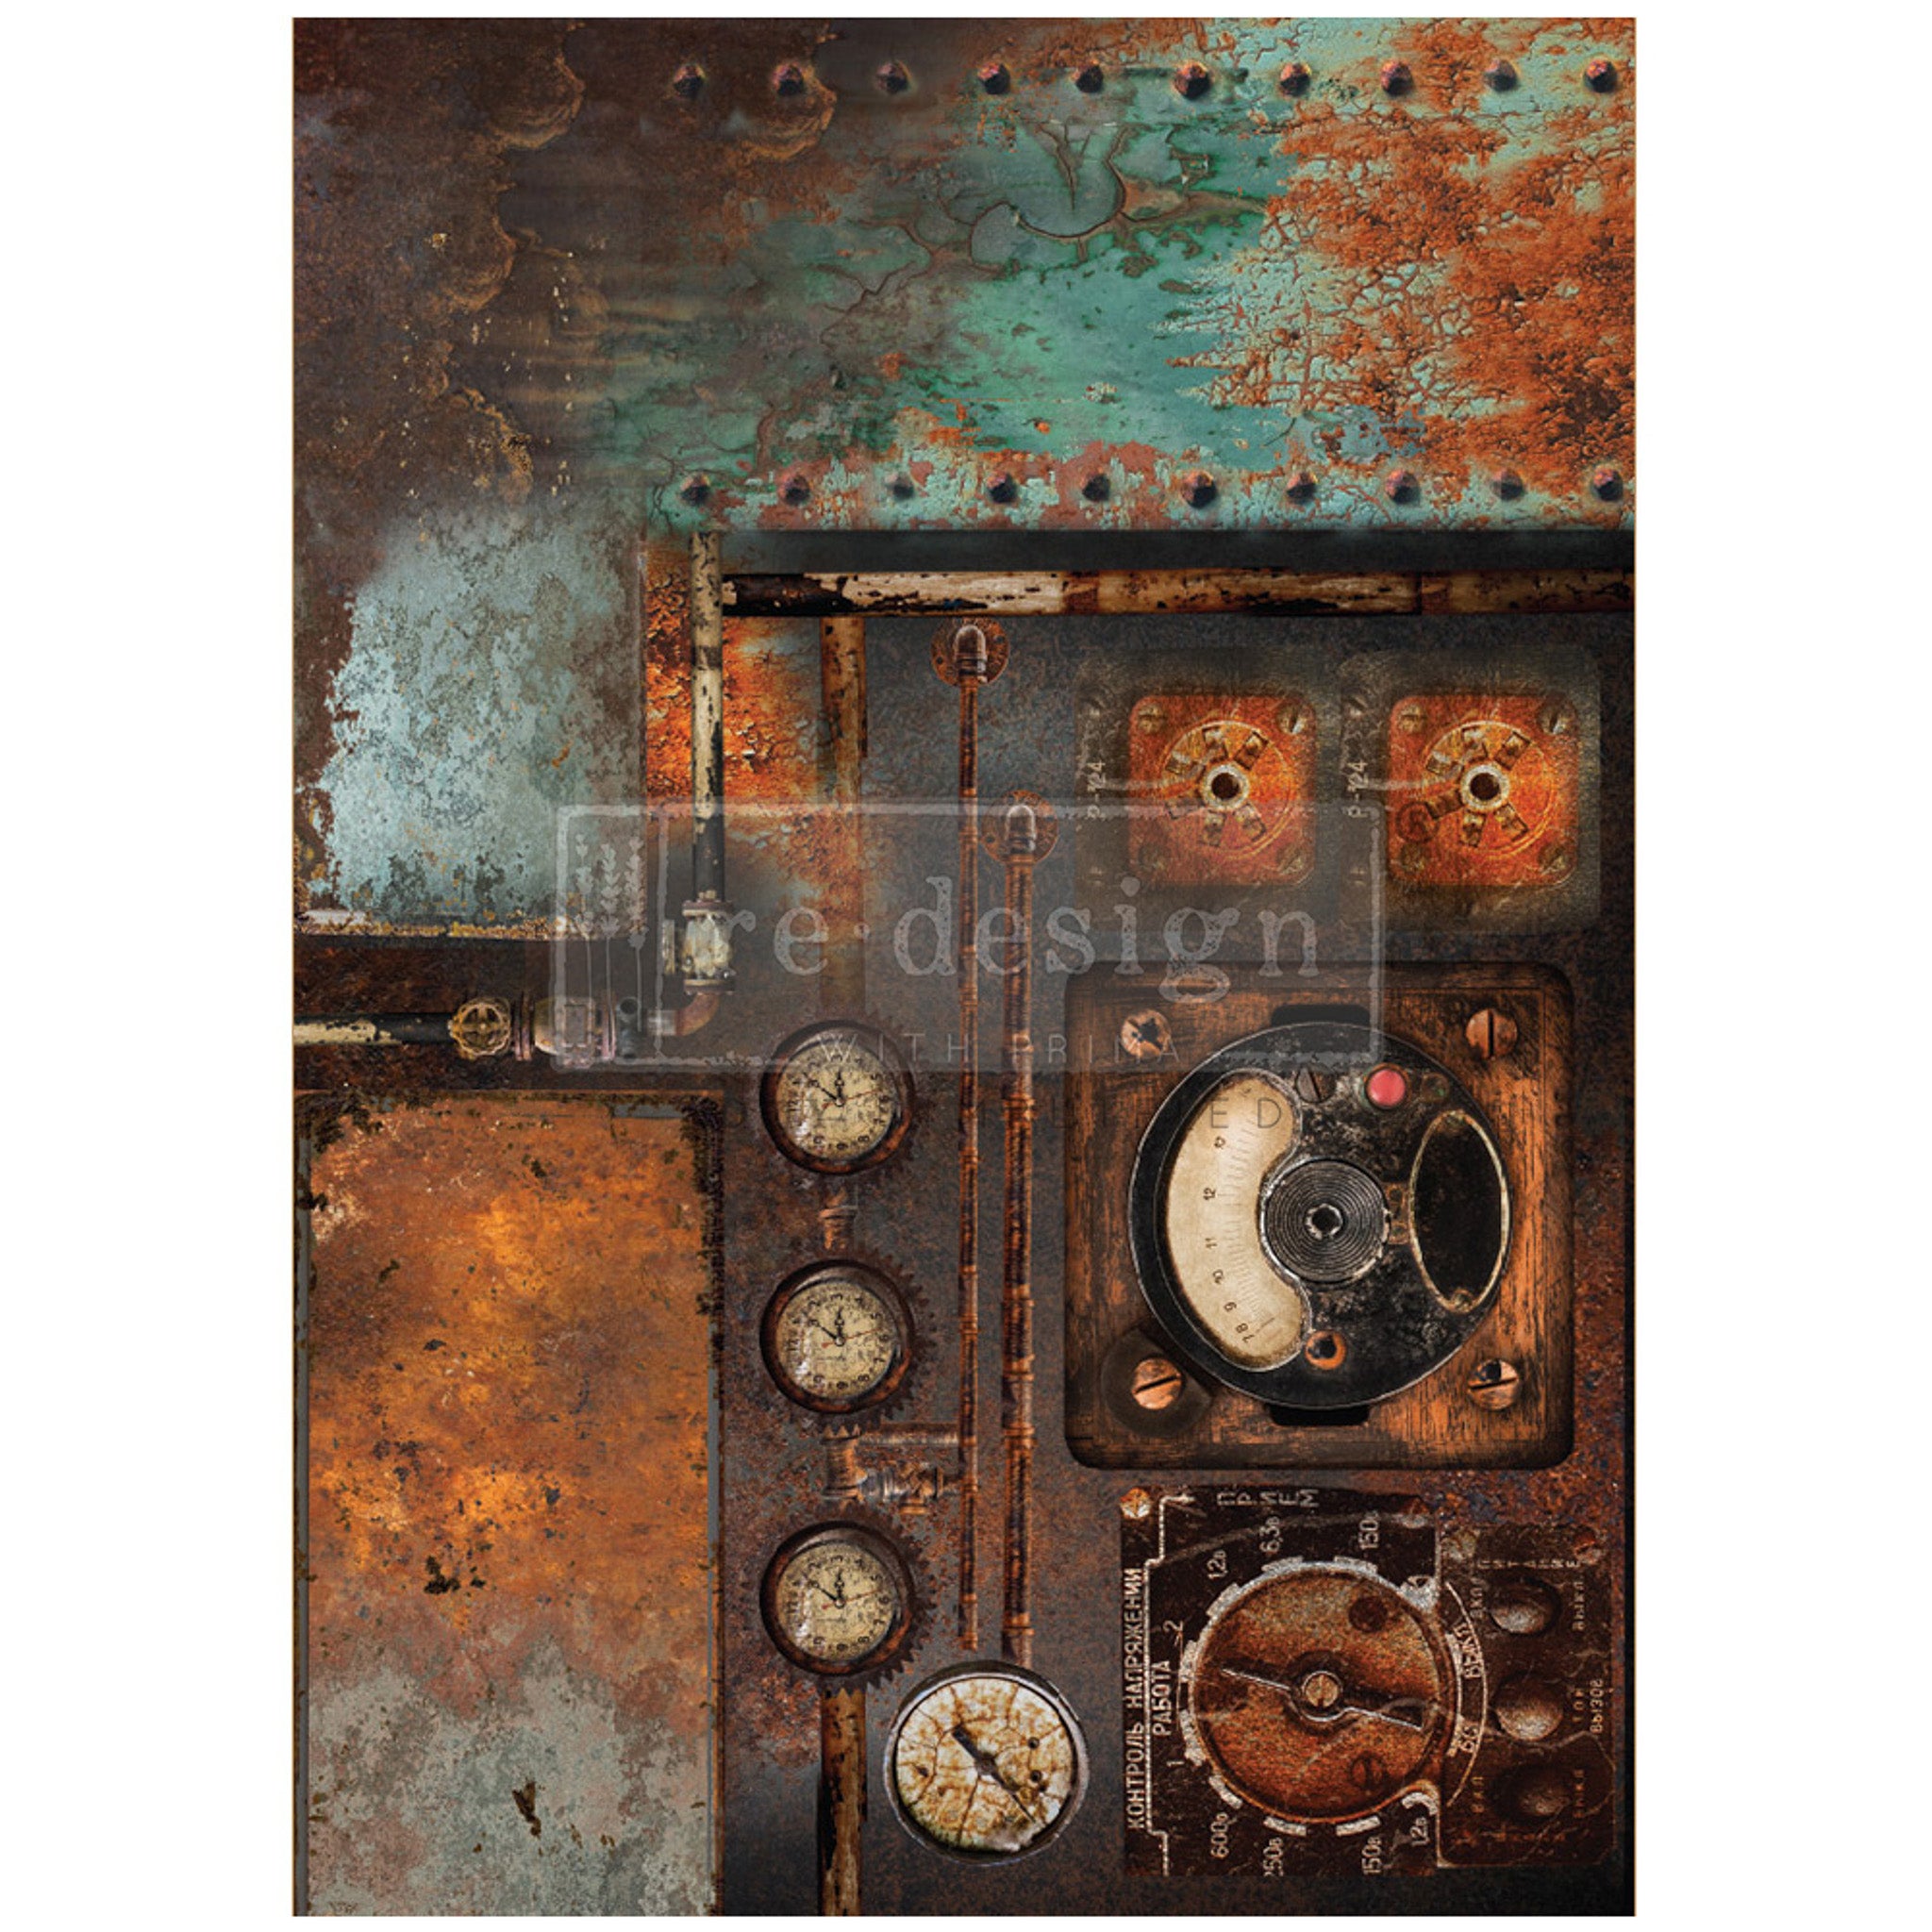 A1 fiber paper that features a bold, rusty antique machine against a rusty patina background. White borders are on the sides.